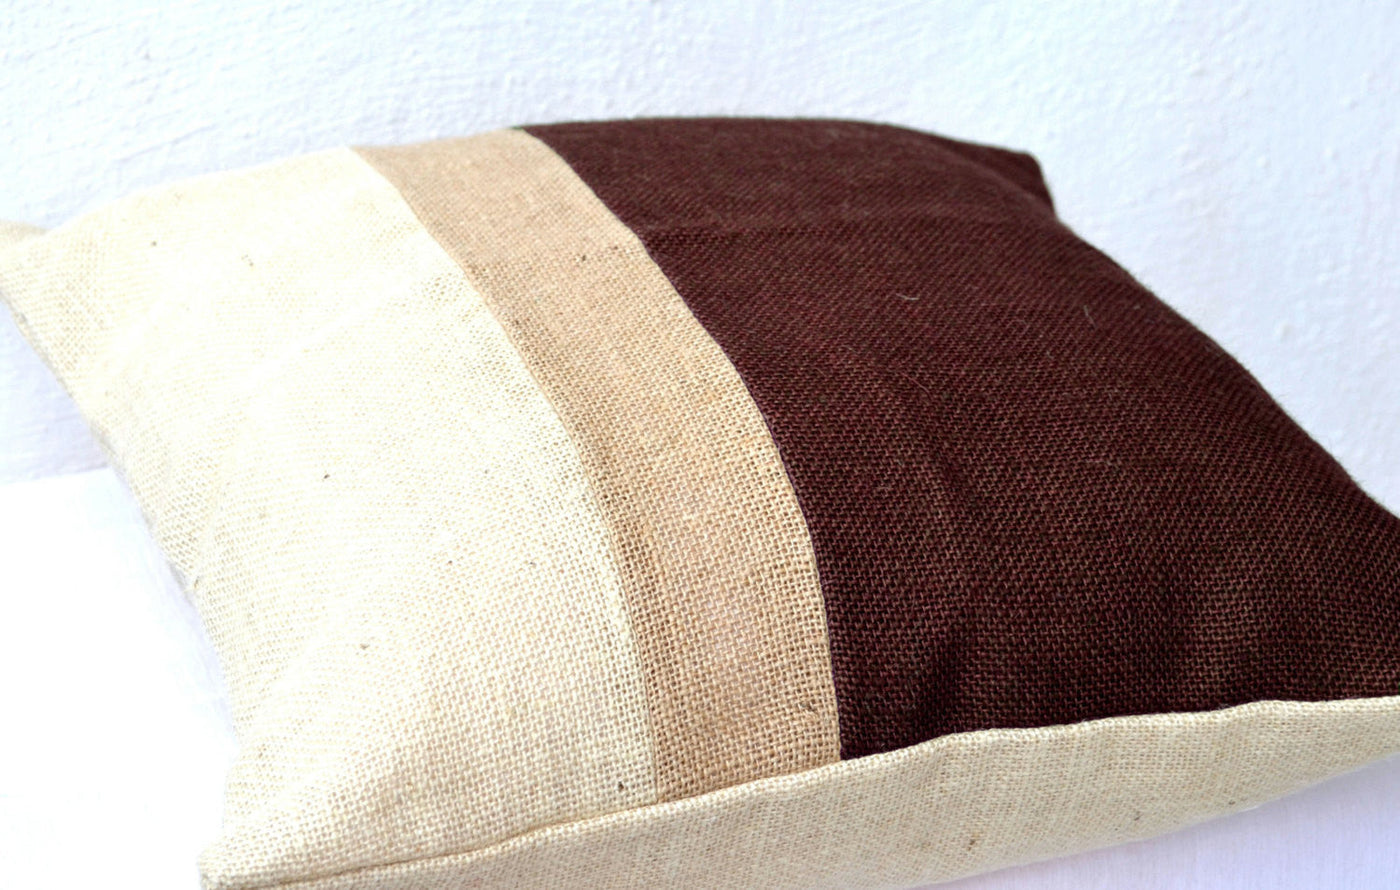 Colorblock Pillow In Neutral Earthen Hues From Ivory Beige Brown Burlap by Amore Beauté